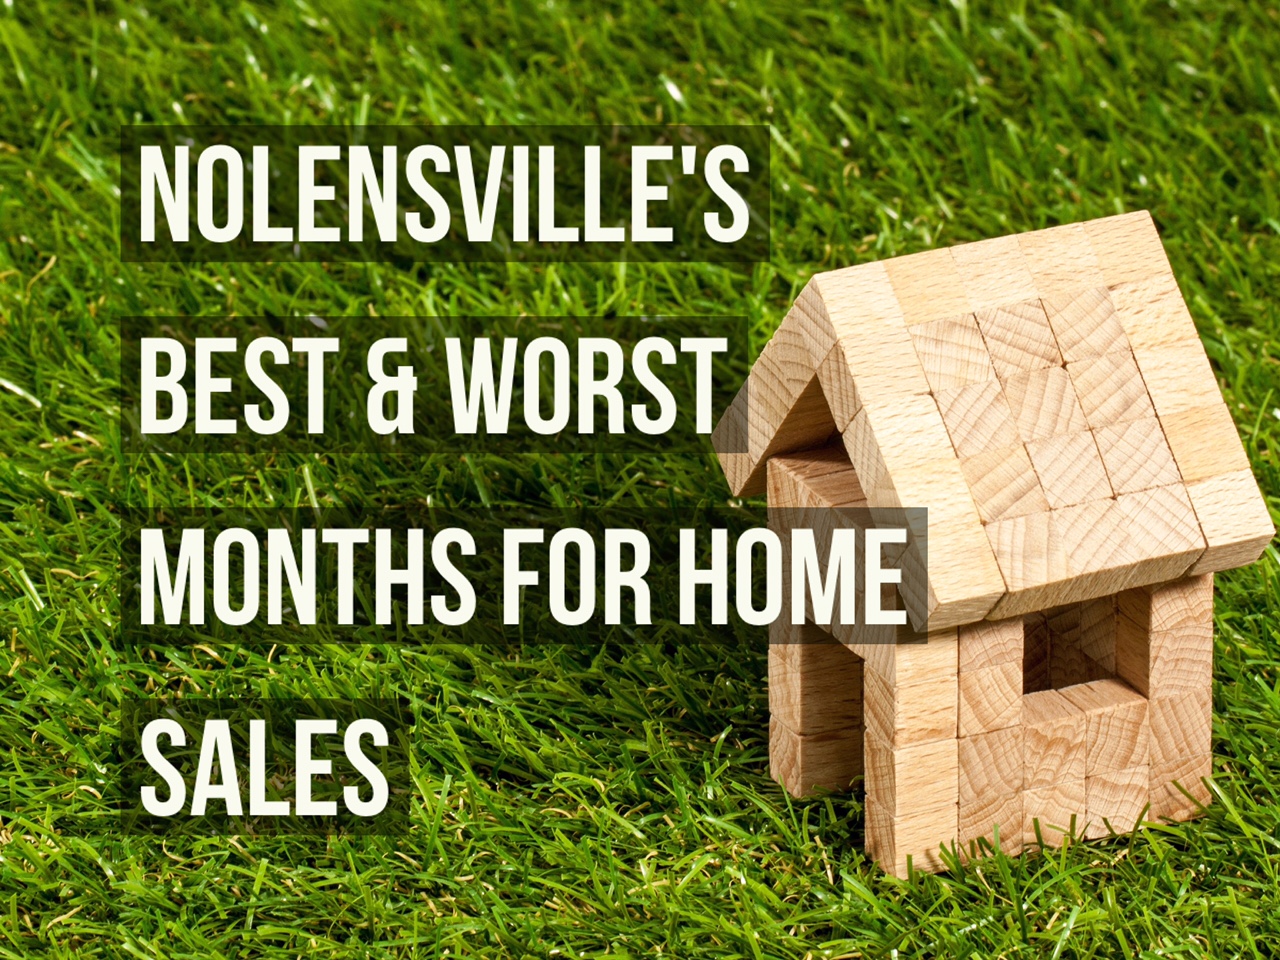 Nolensville's Best and Worst Months for Home Sales - August 2016